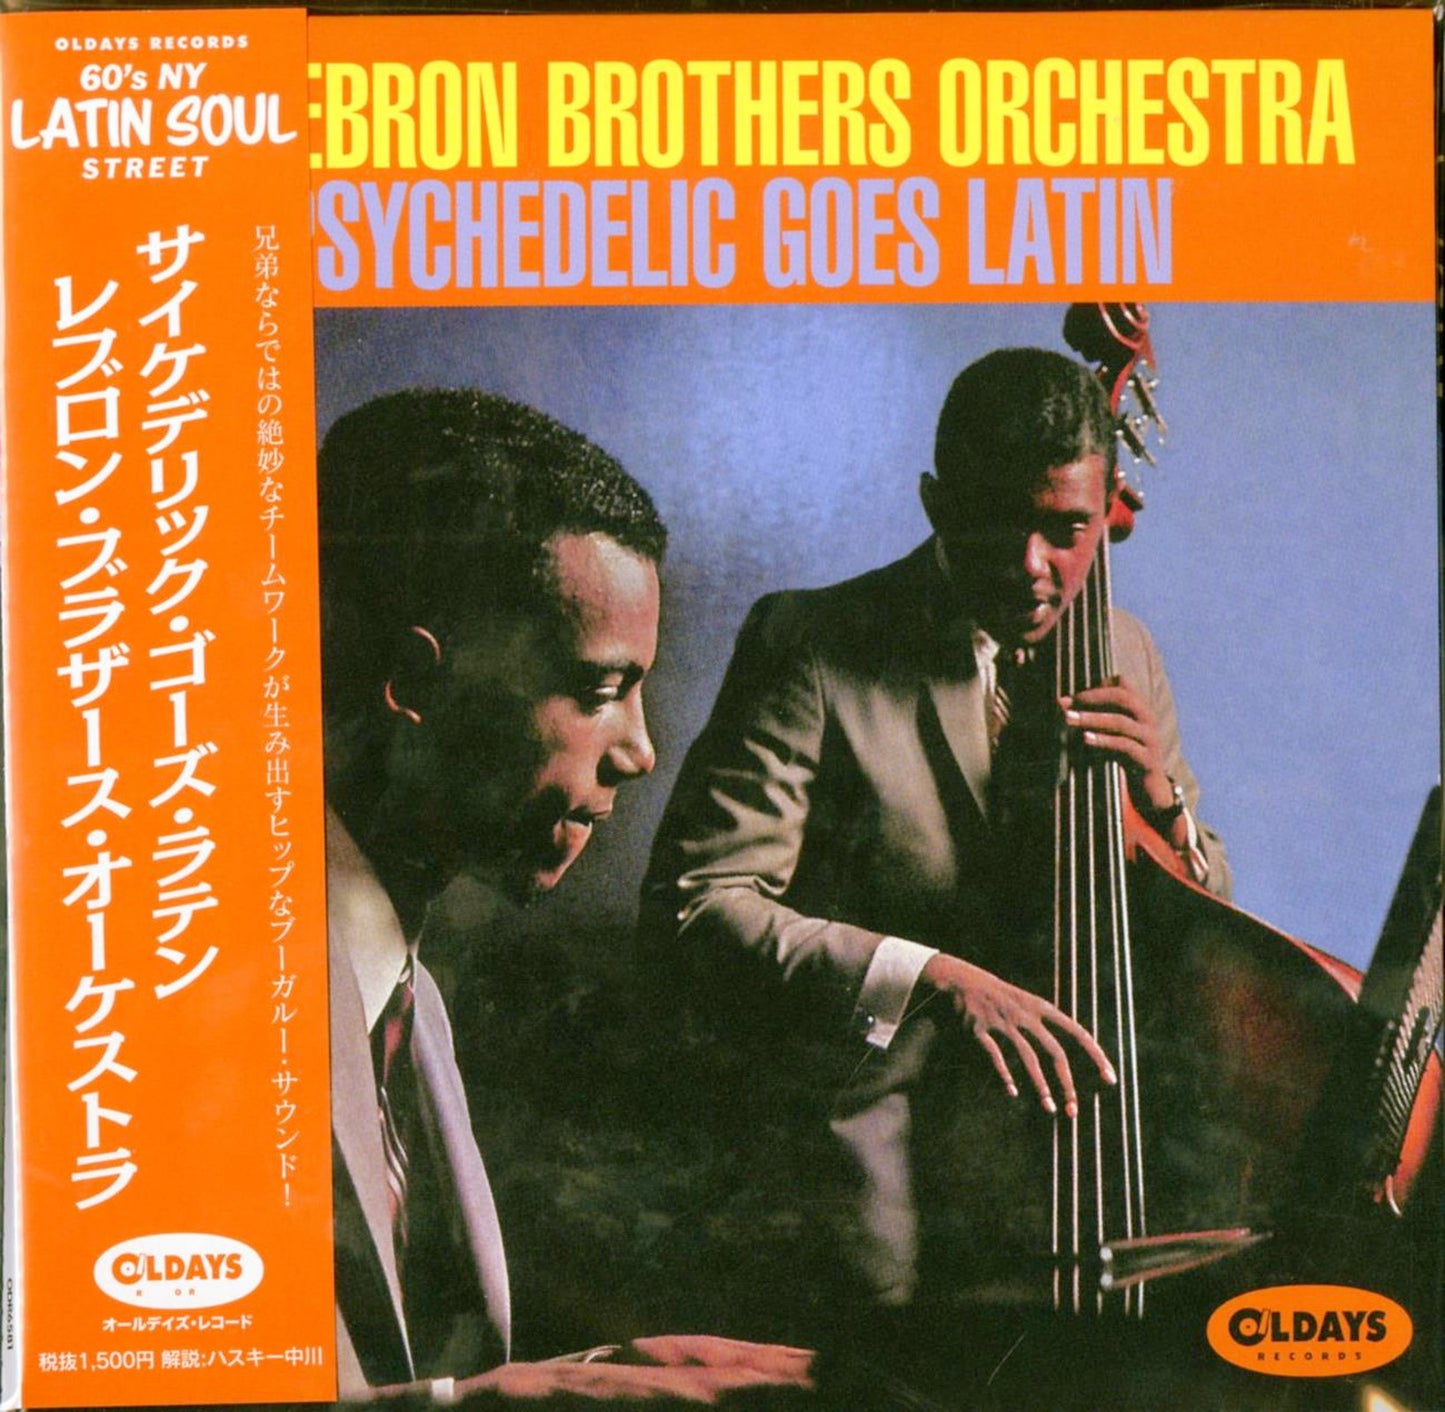 The Lebron Brothers Orchestra - Psychedelic Goes Latin - Japan  Mini LP CD